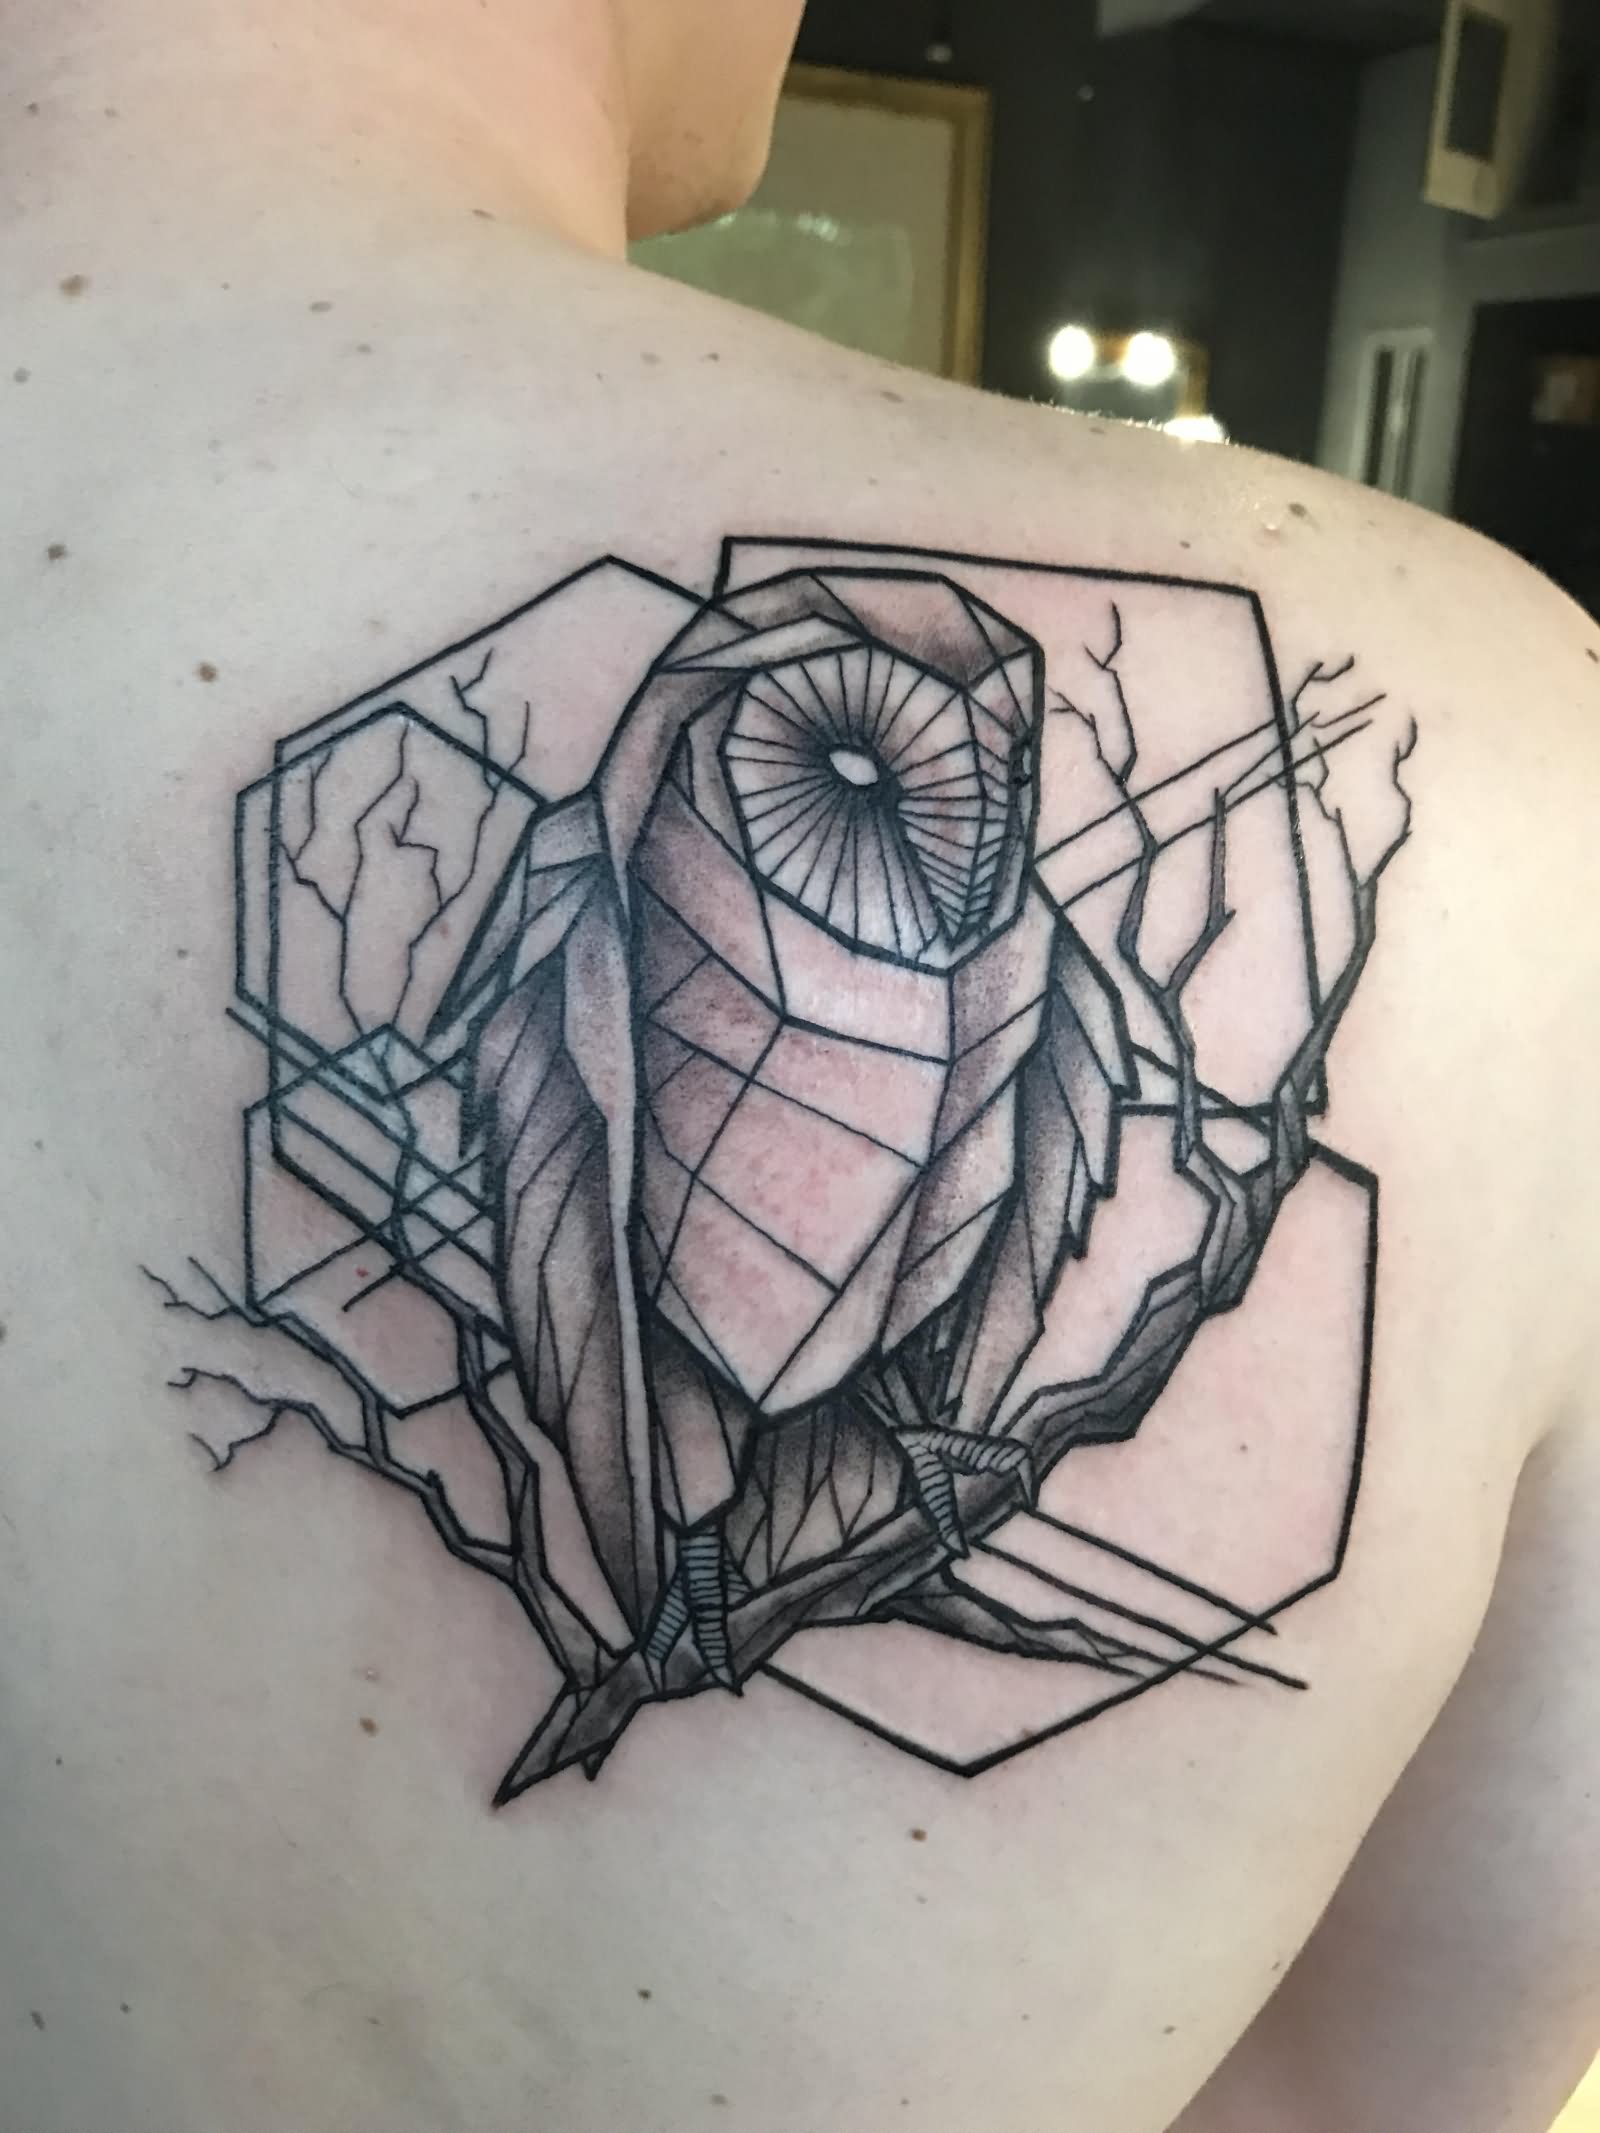 Geometric Barn Owl Tattoo On Back Shoulder by Dave Norton at Pino Bros Ink Cambridge MA